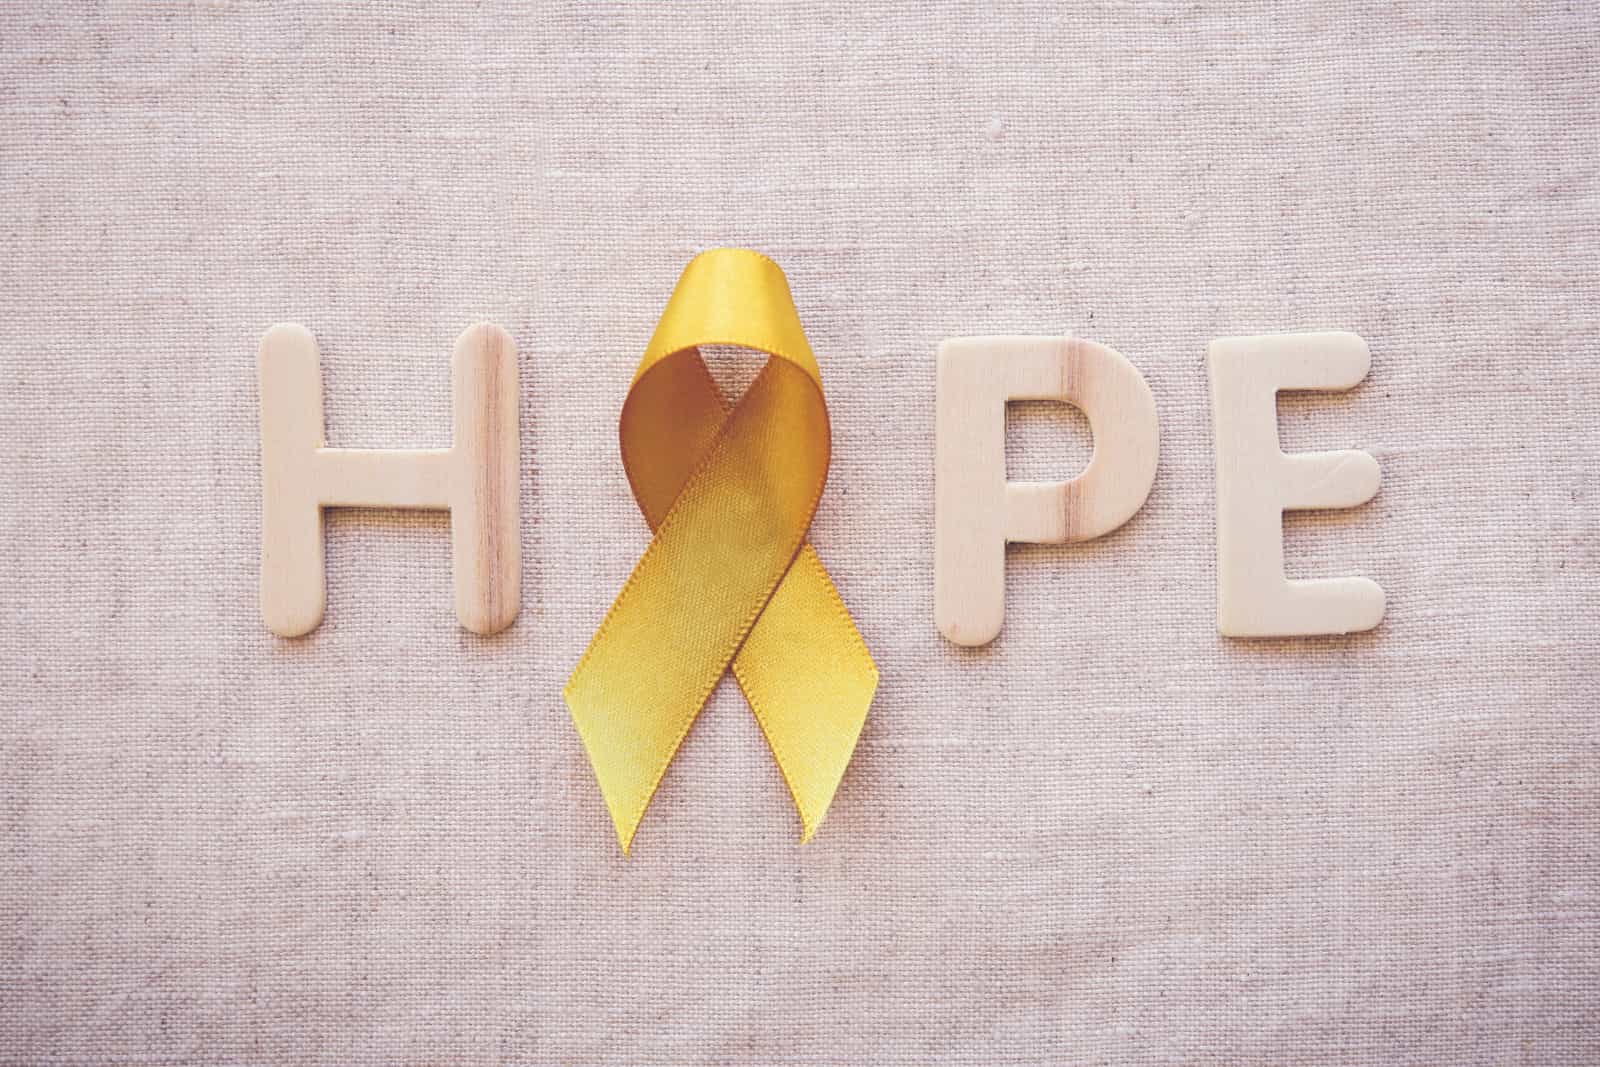 HOPE in light wooden letters on a cream linen background. The "O" is a gold ribbon for Childhood Cancer Awareness Month